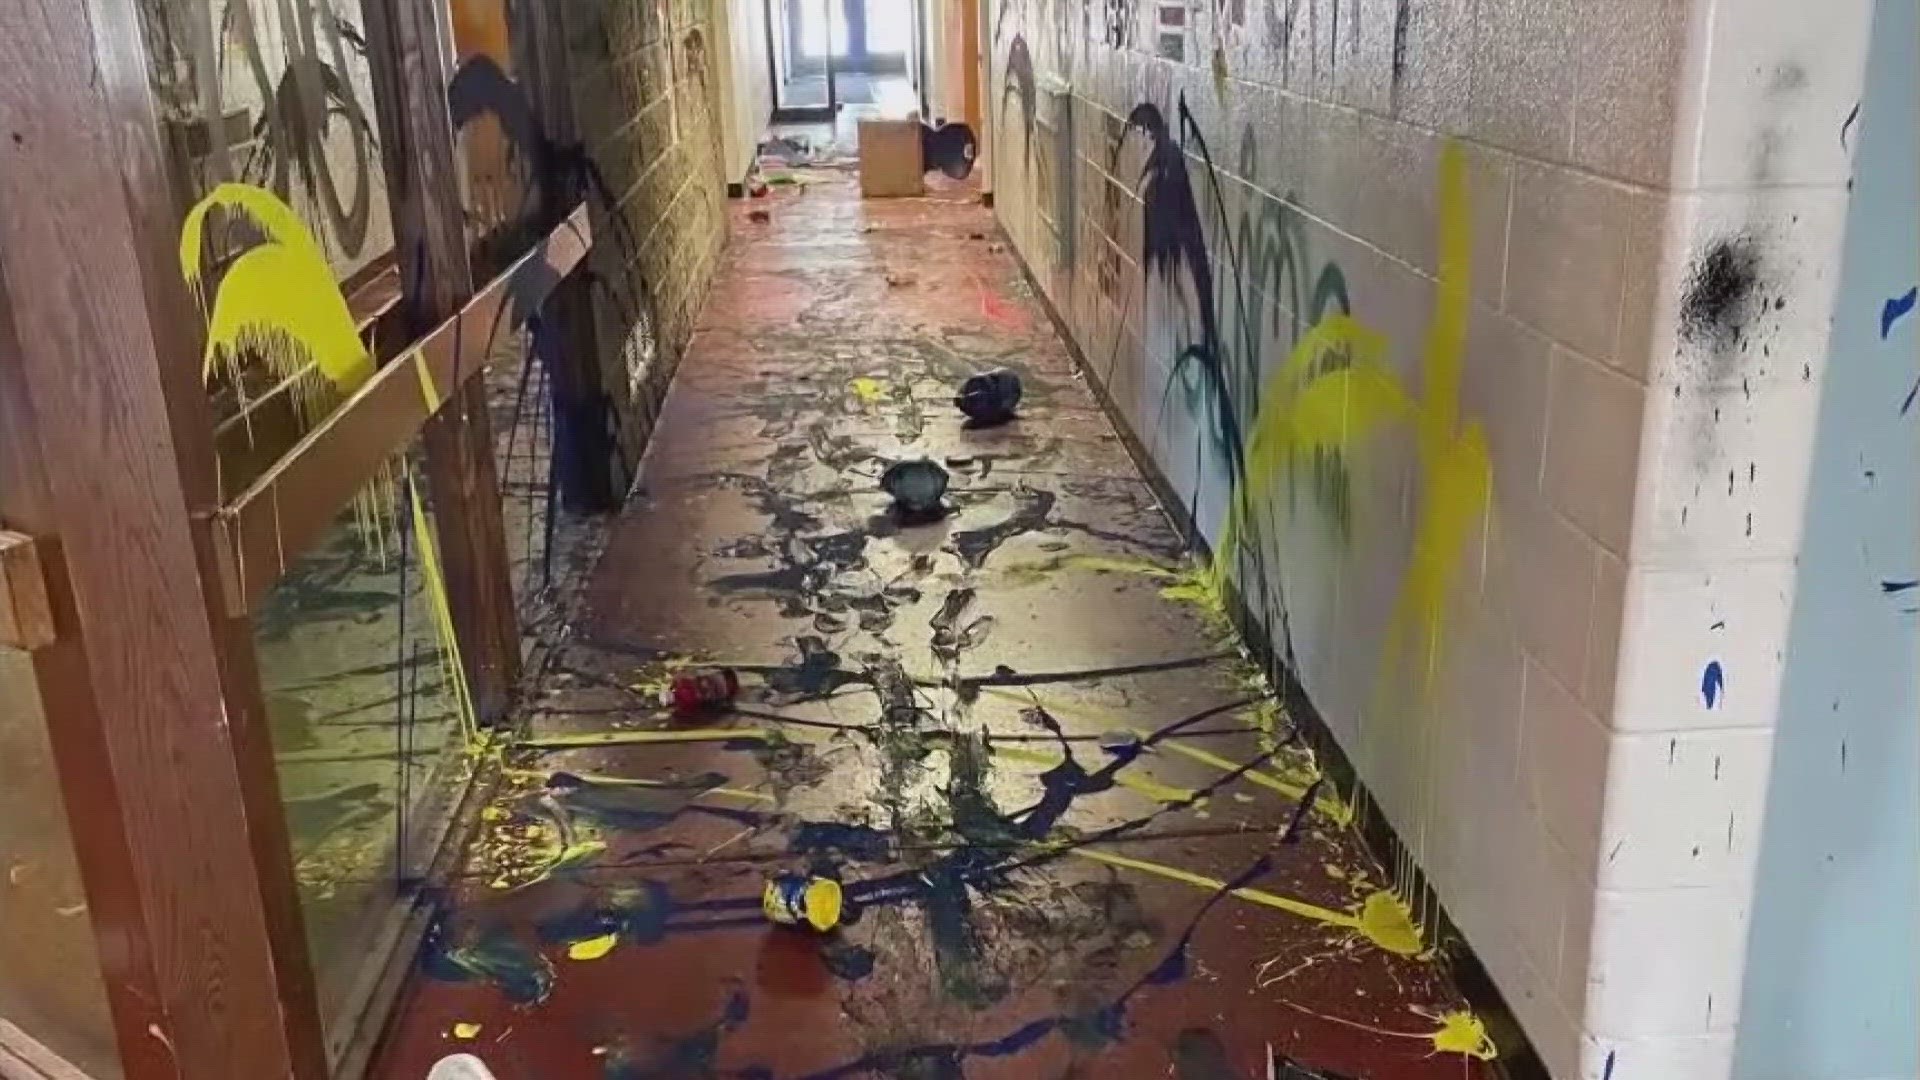 The Lewiston superintendent says the students range from ages eight to 12 and broke into Longley School Saturday night where they caused extensive damage.